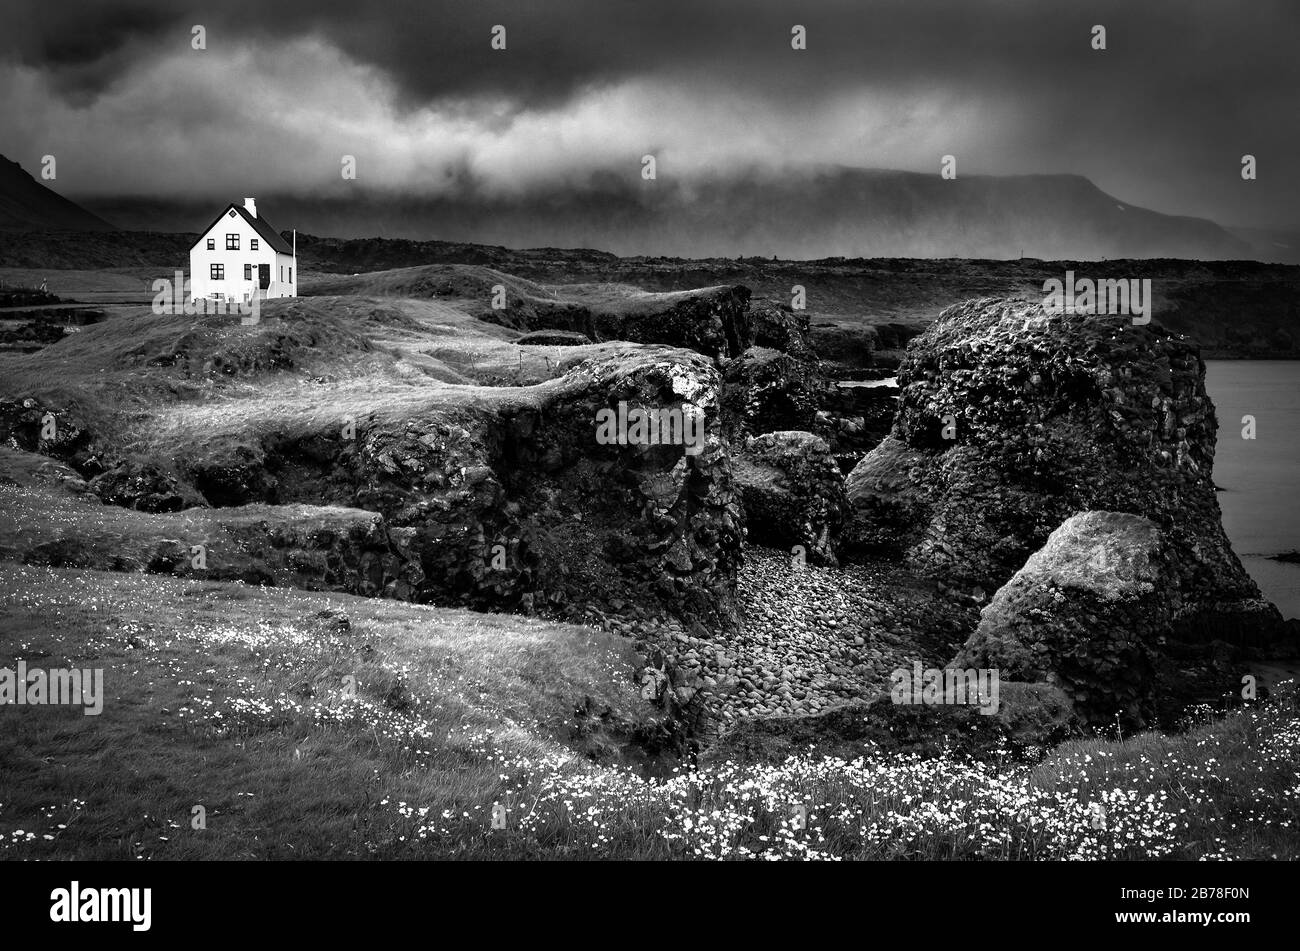 Dramatic Icelandic landscape with steep rocks and a lonely house. Stock Photo